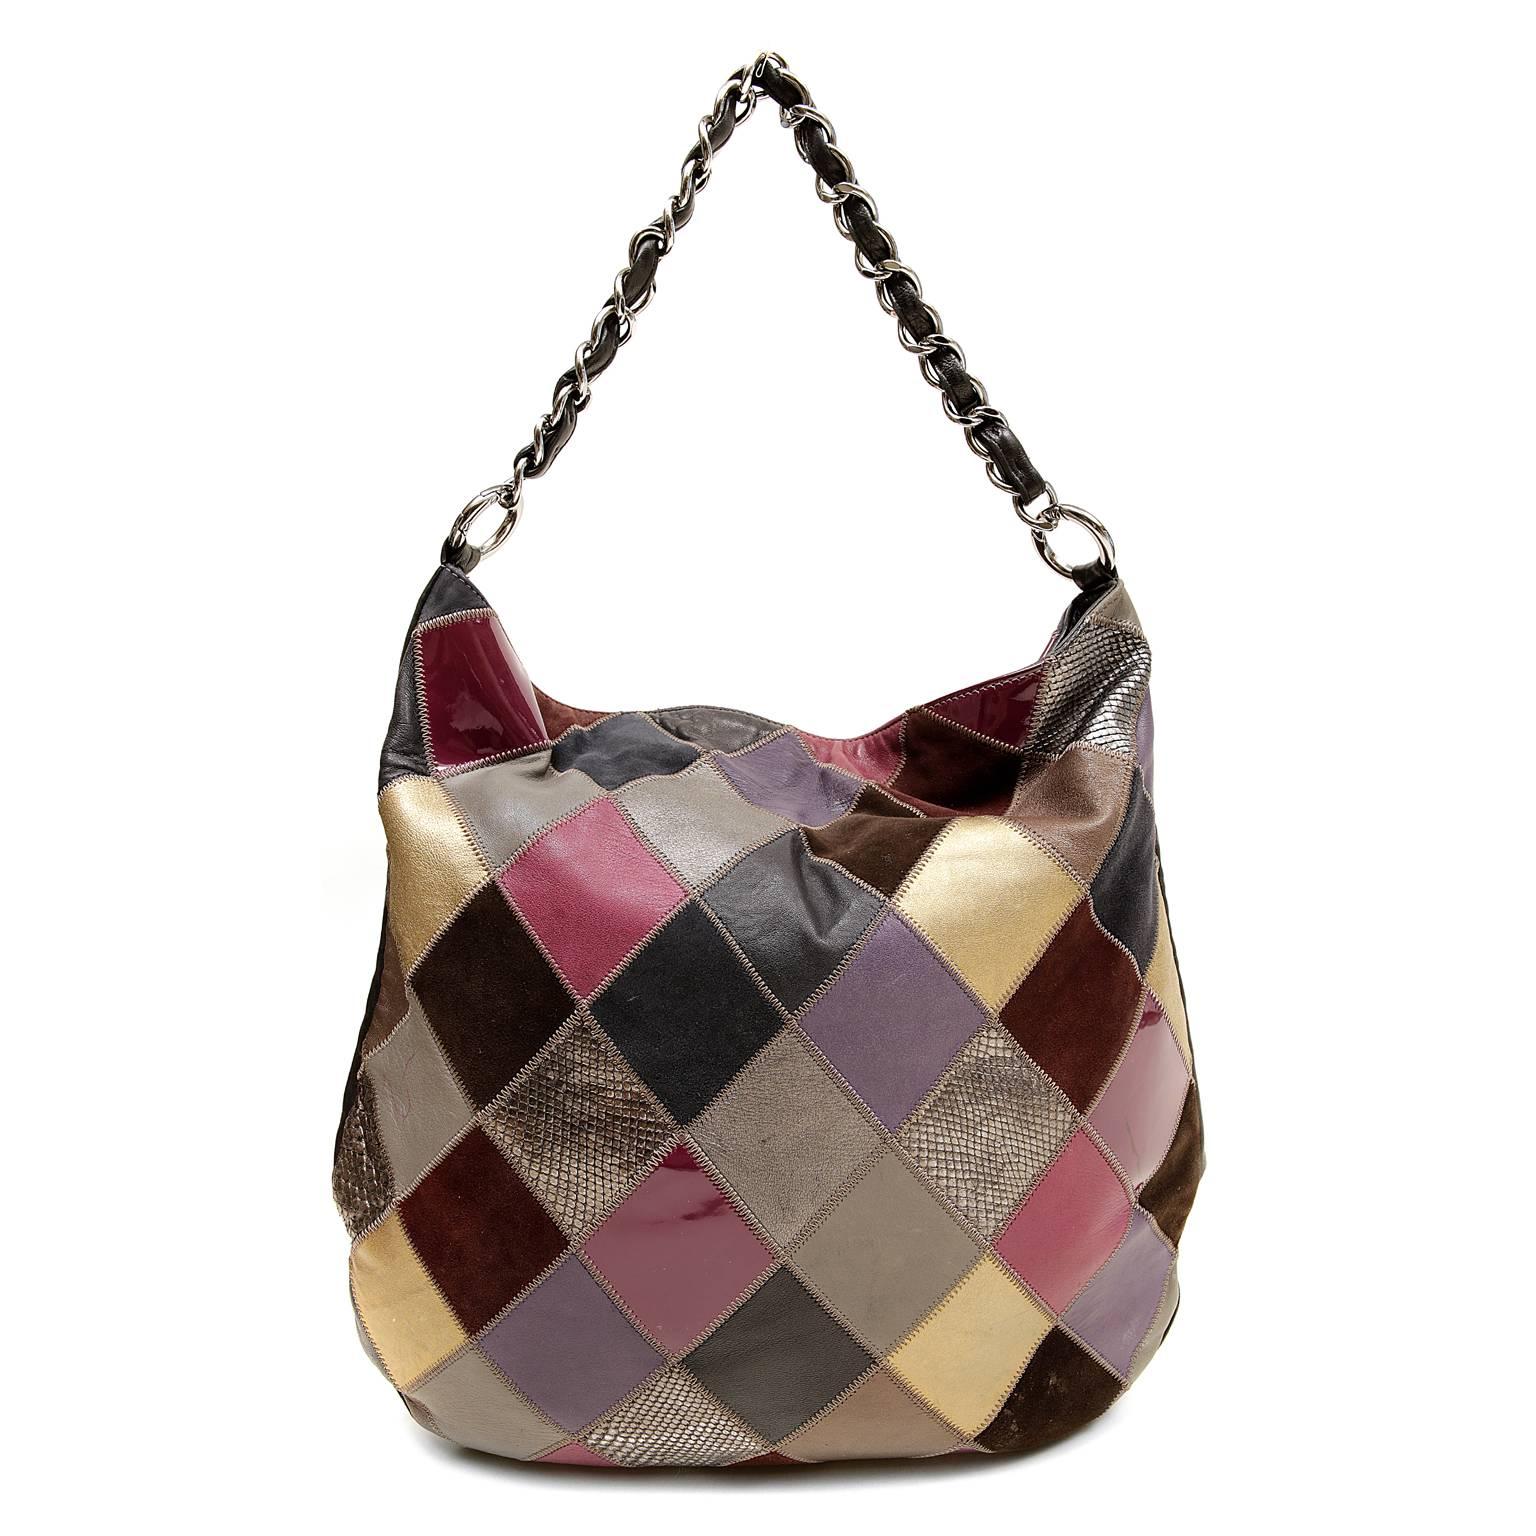 Chanel Multicolor Patchwork Hobo- EXCELLENT PLUS
 The unique style combines texture and color brilliantly; perfect for everyday enjoyment. 

Suede, python, and leather patches are sewn together in a harlequin pattern.  Neutrals, metallics and jewel